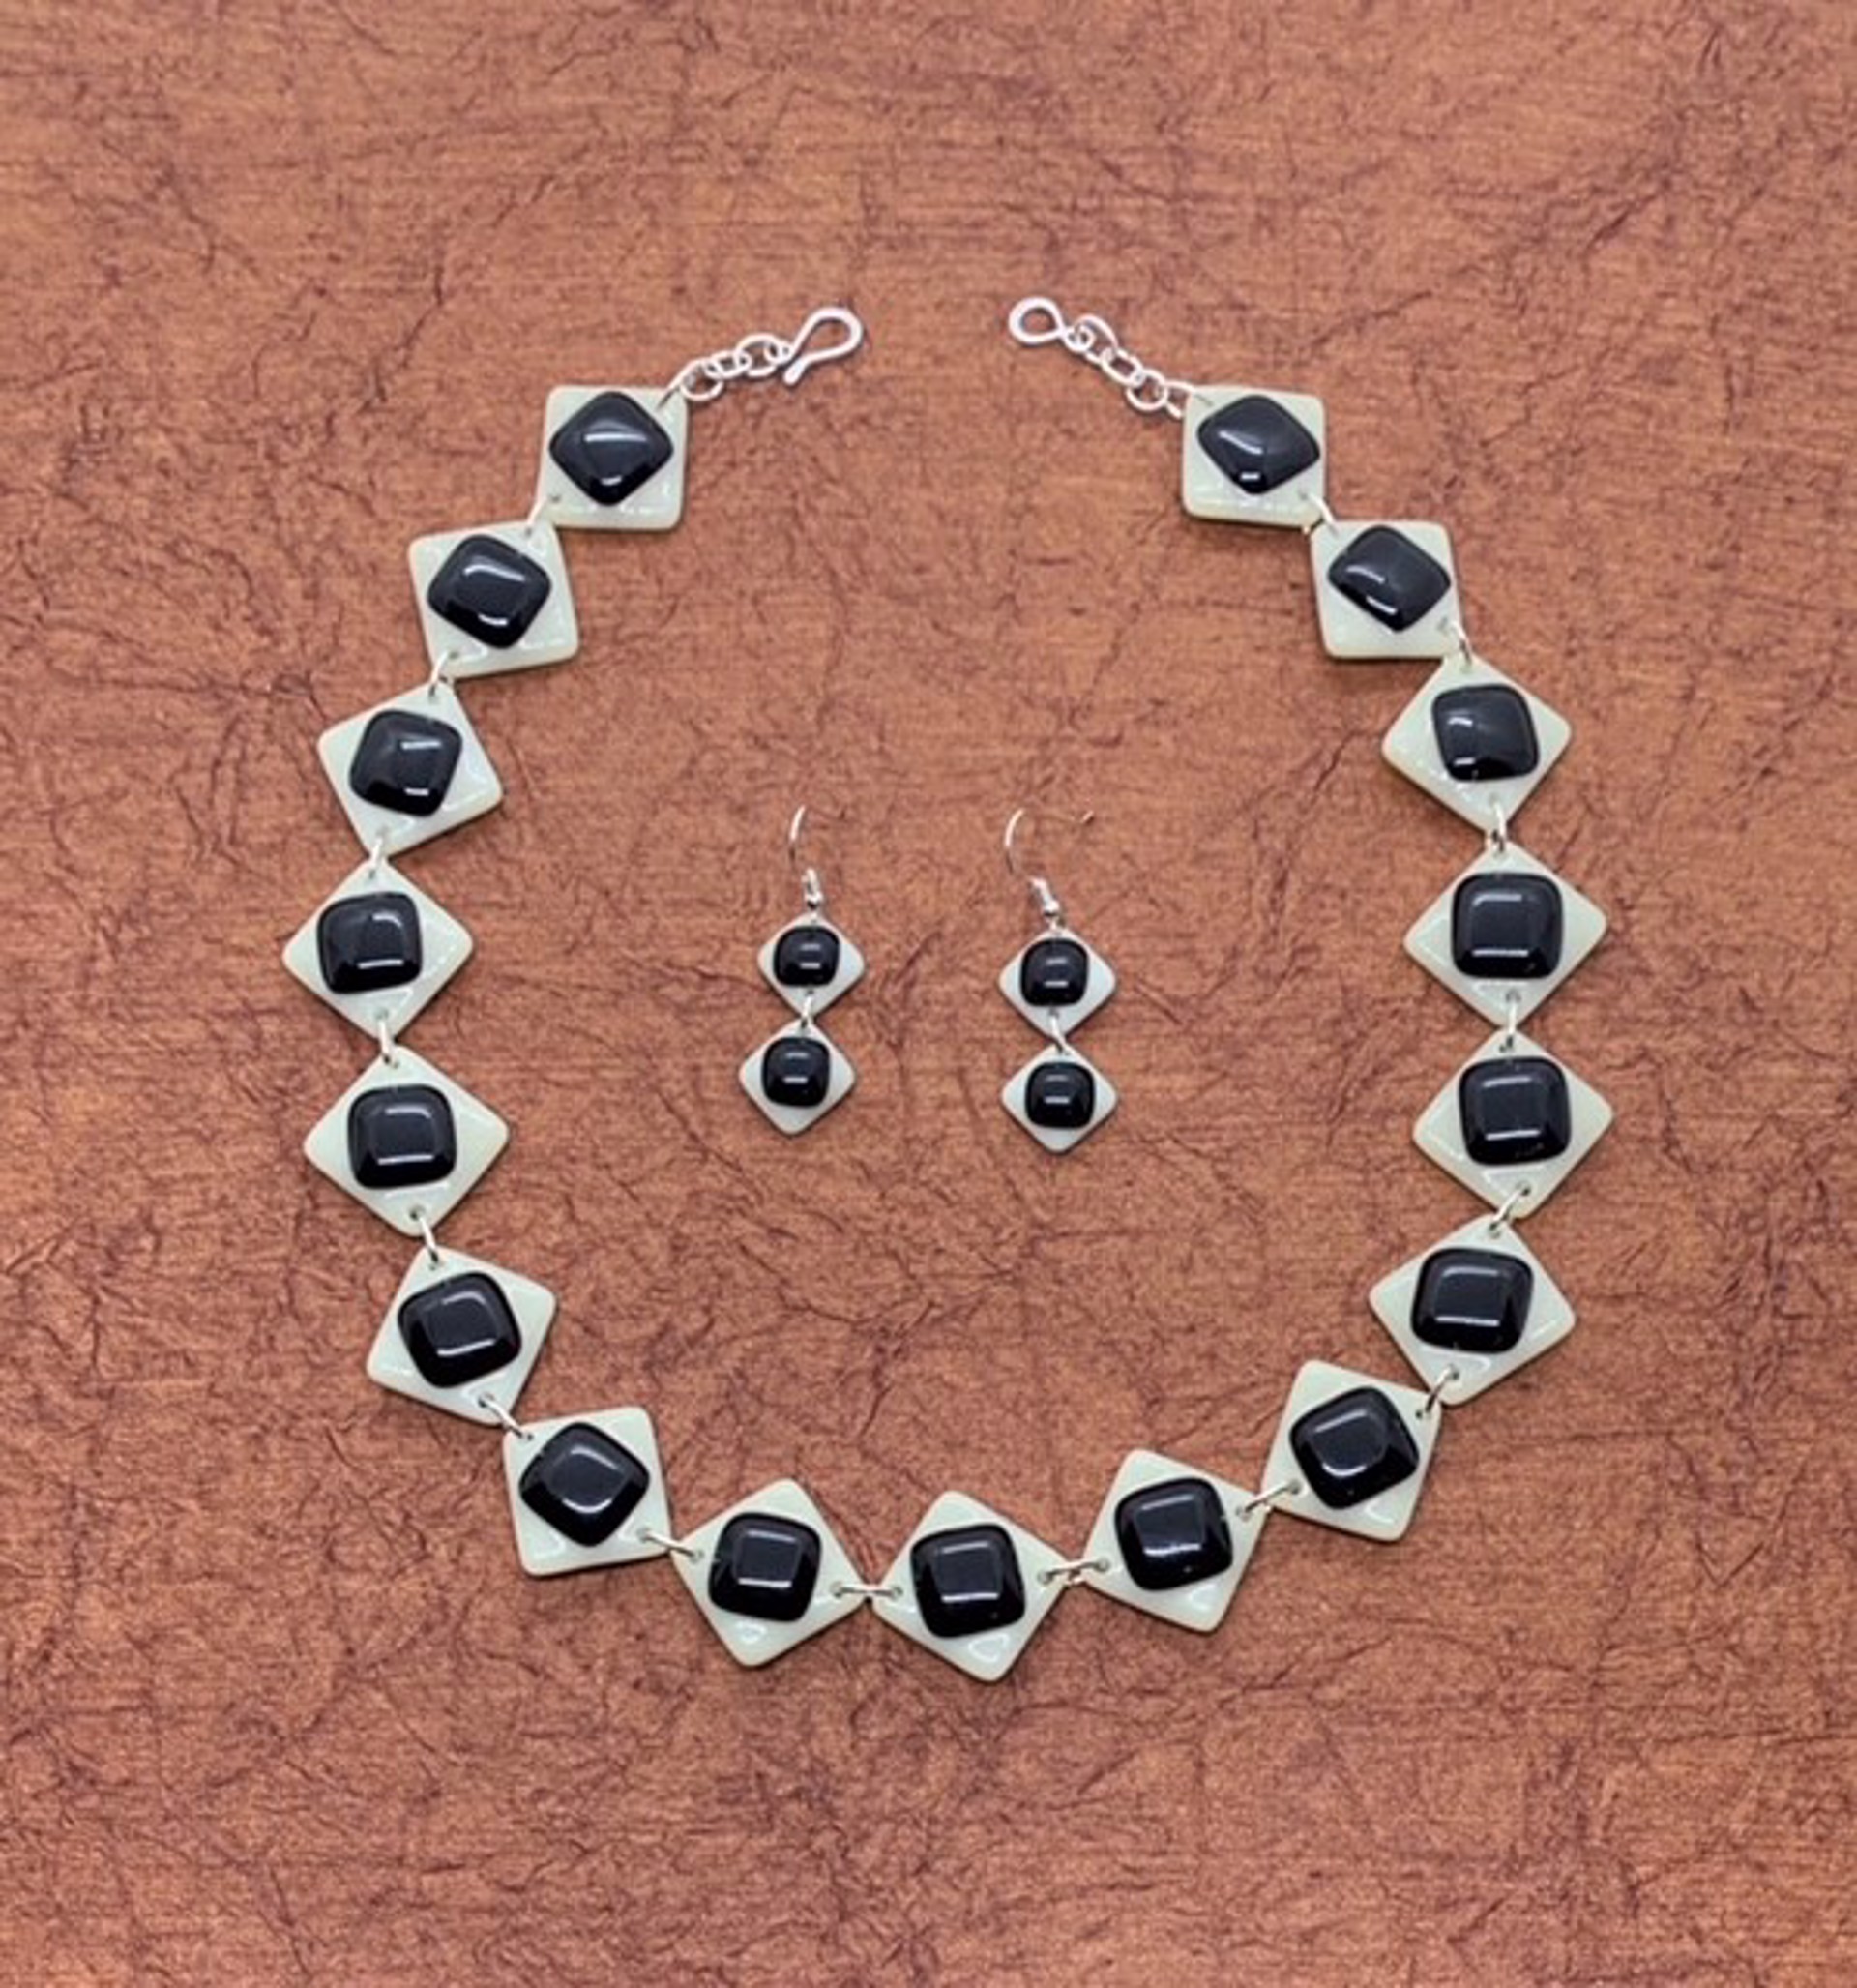 Custom Necklace and Earrings in Vanilla and Black - Pembleton by Chris Cox